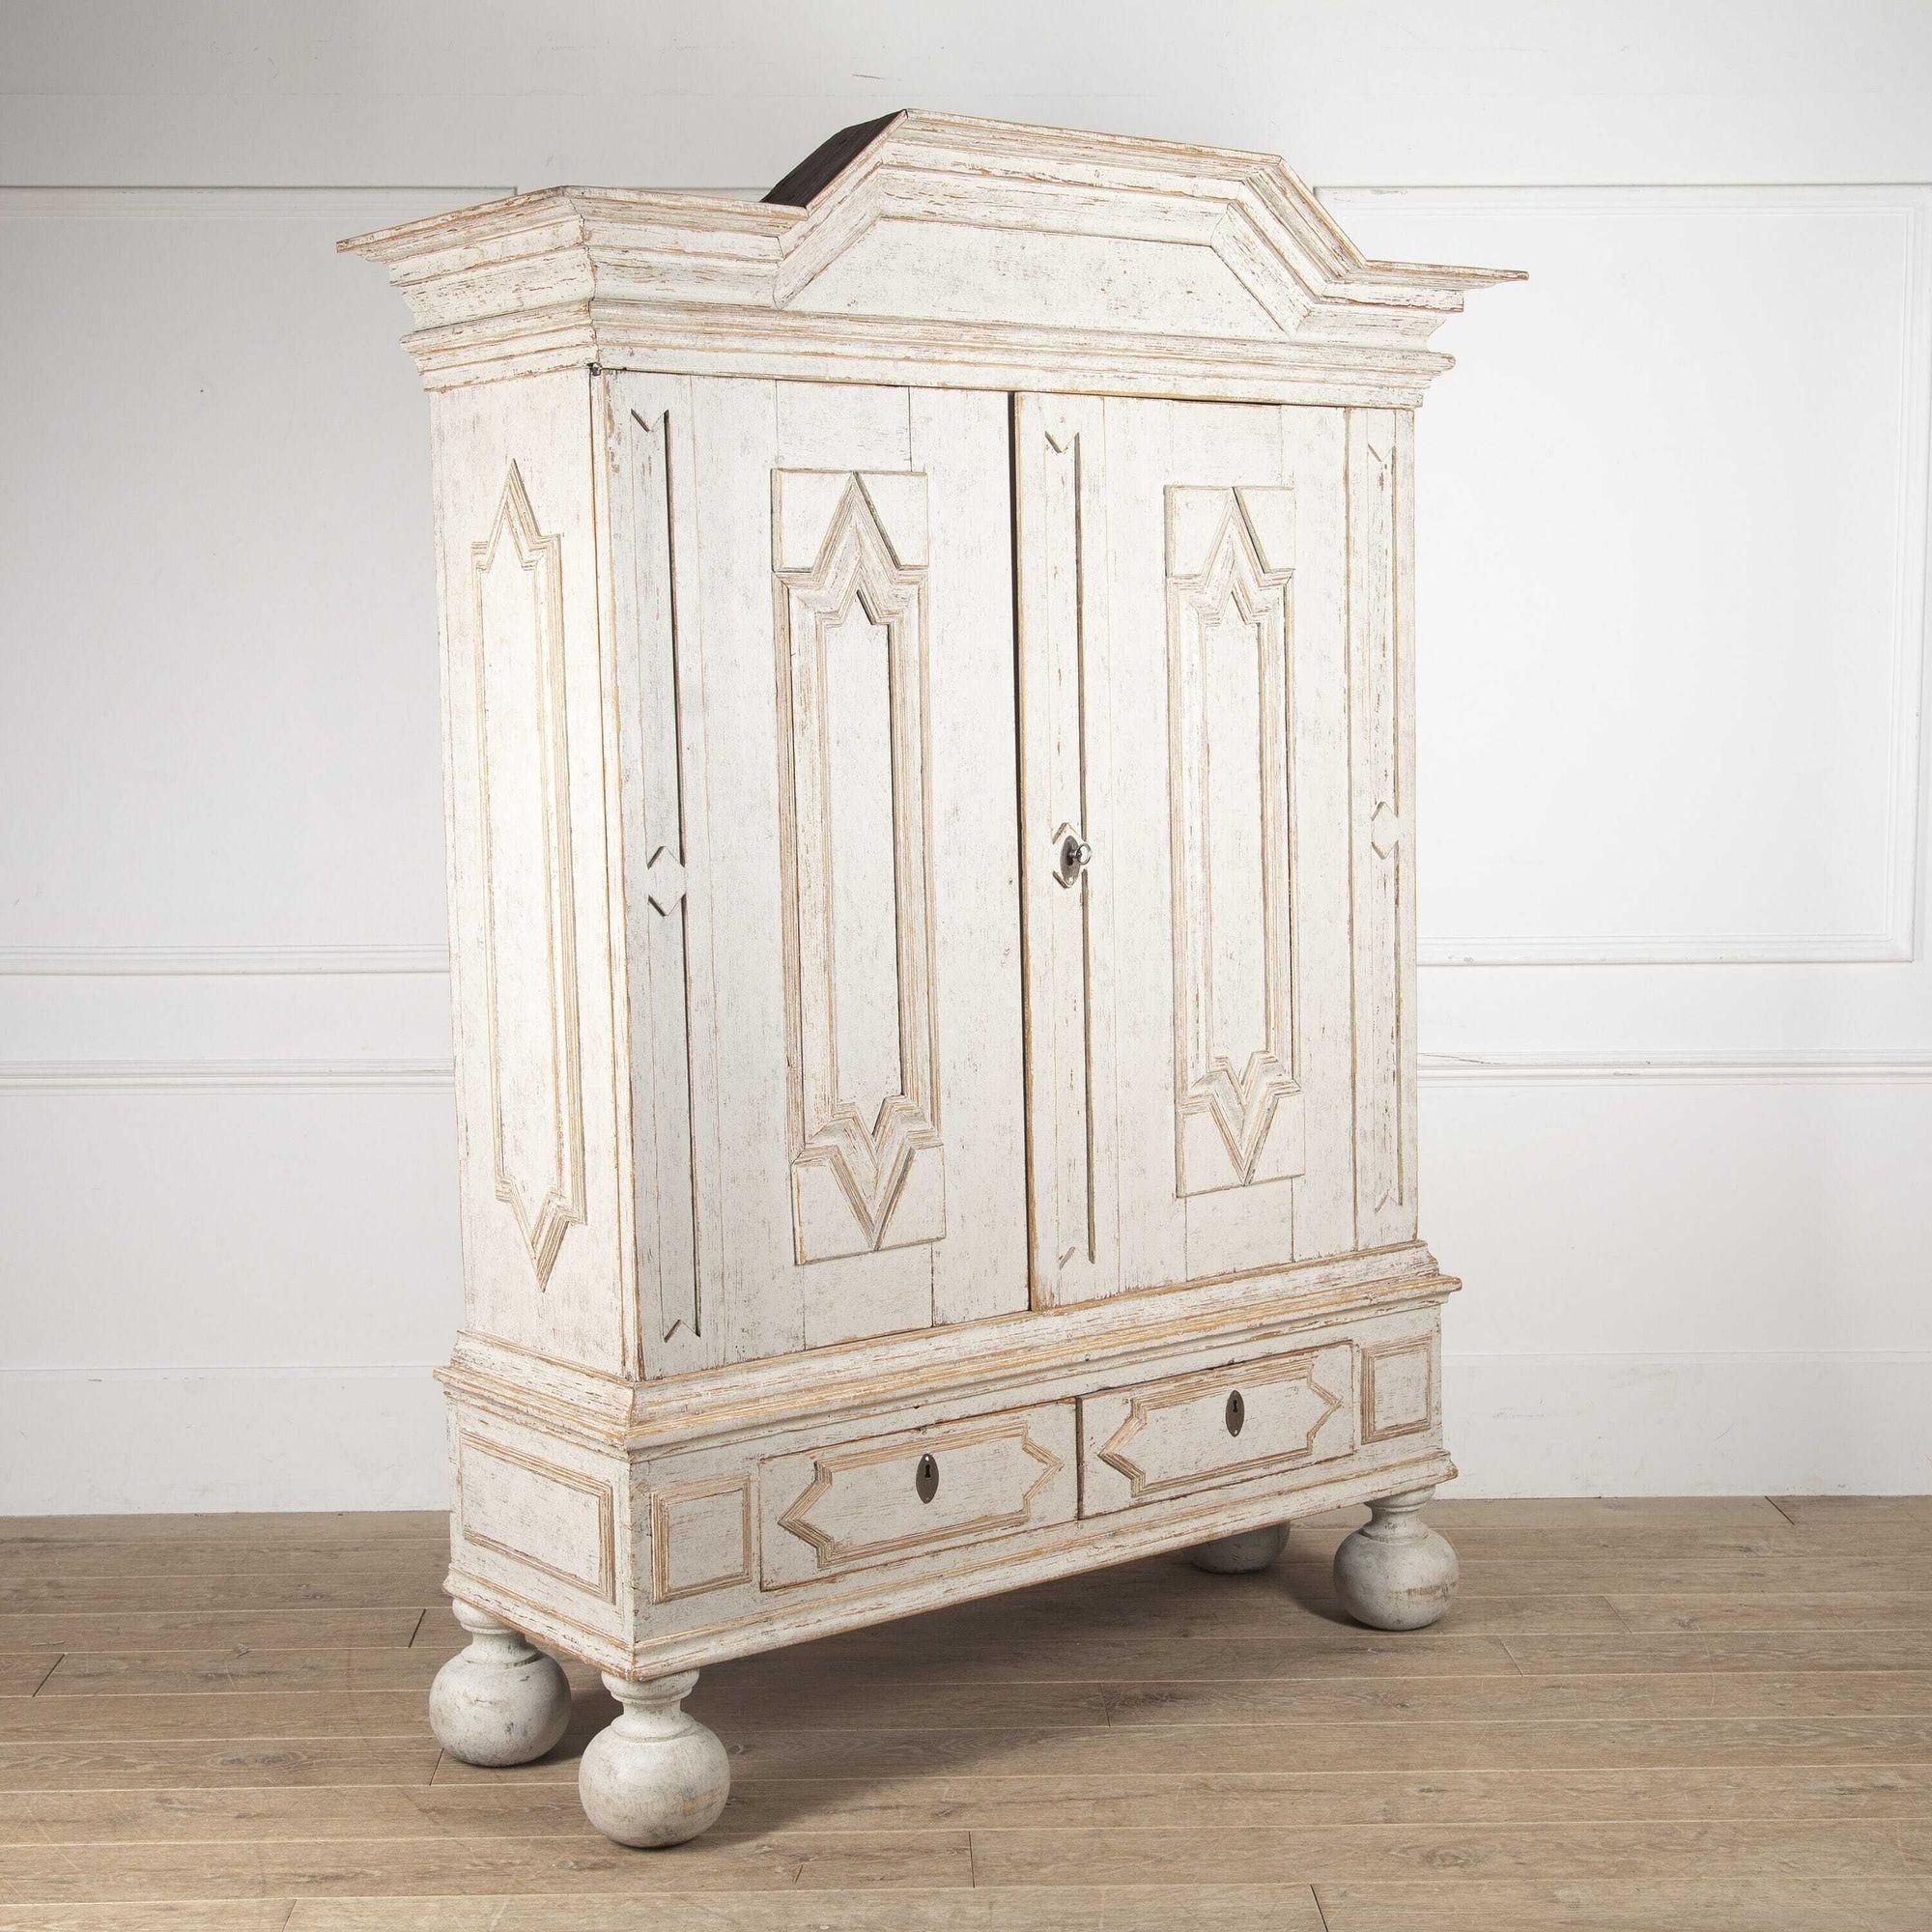 Beautifully carved Swedish painted cabinet from the Baroque period, circa 1740, with a decorative pediment and carved diamond detailing on the doors and sides. Two large doors open to the interior which is painted in a variety of blue shades with